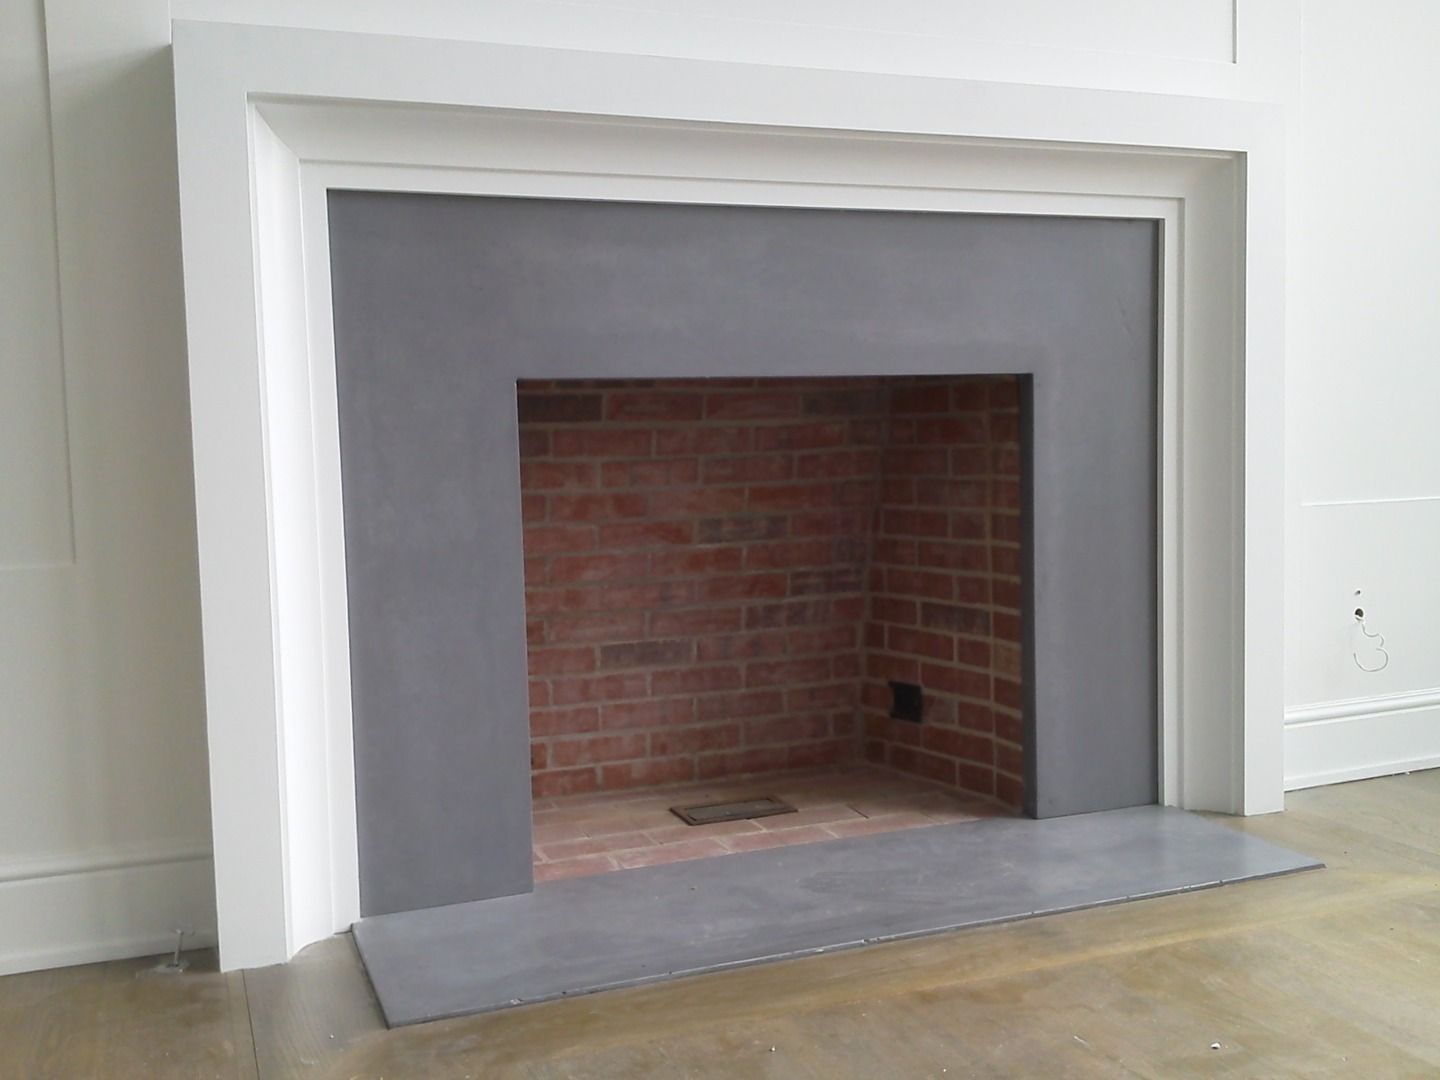 Gray Stone Fireplace New Stone Surround You Would Need Much Thinner Mantle Piece I